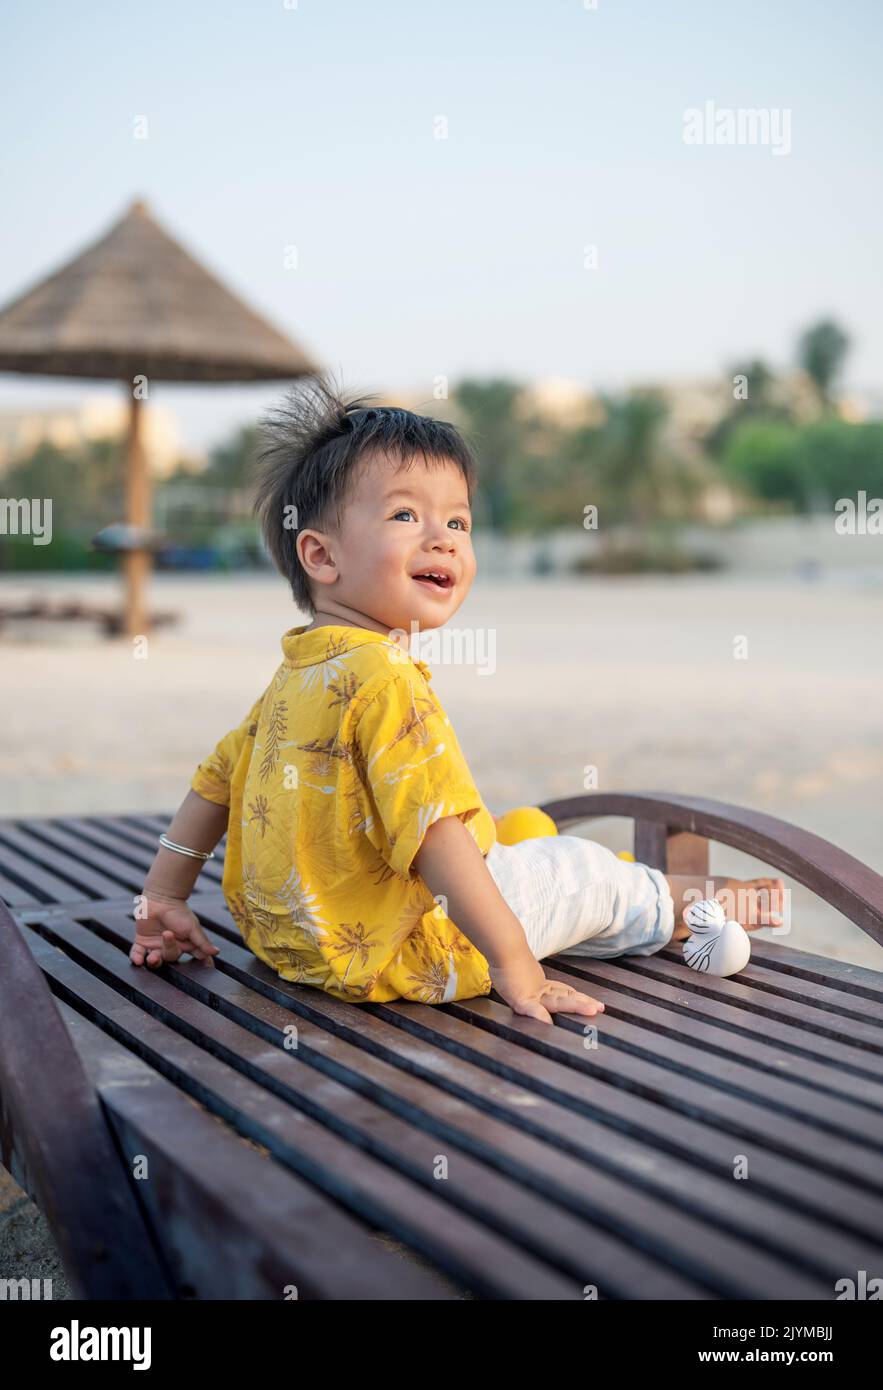 Baby boy on a beach holiday sitting on the sunbed at sunset. One year old male infant on the vacation by the seaside sitting on the sunbed Stock Photo